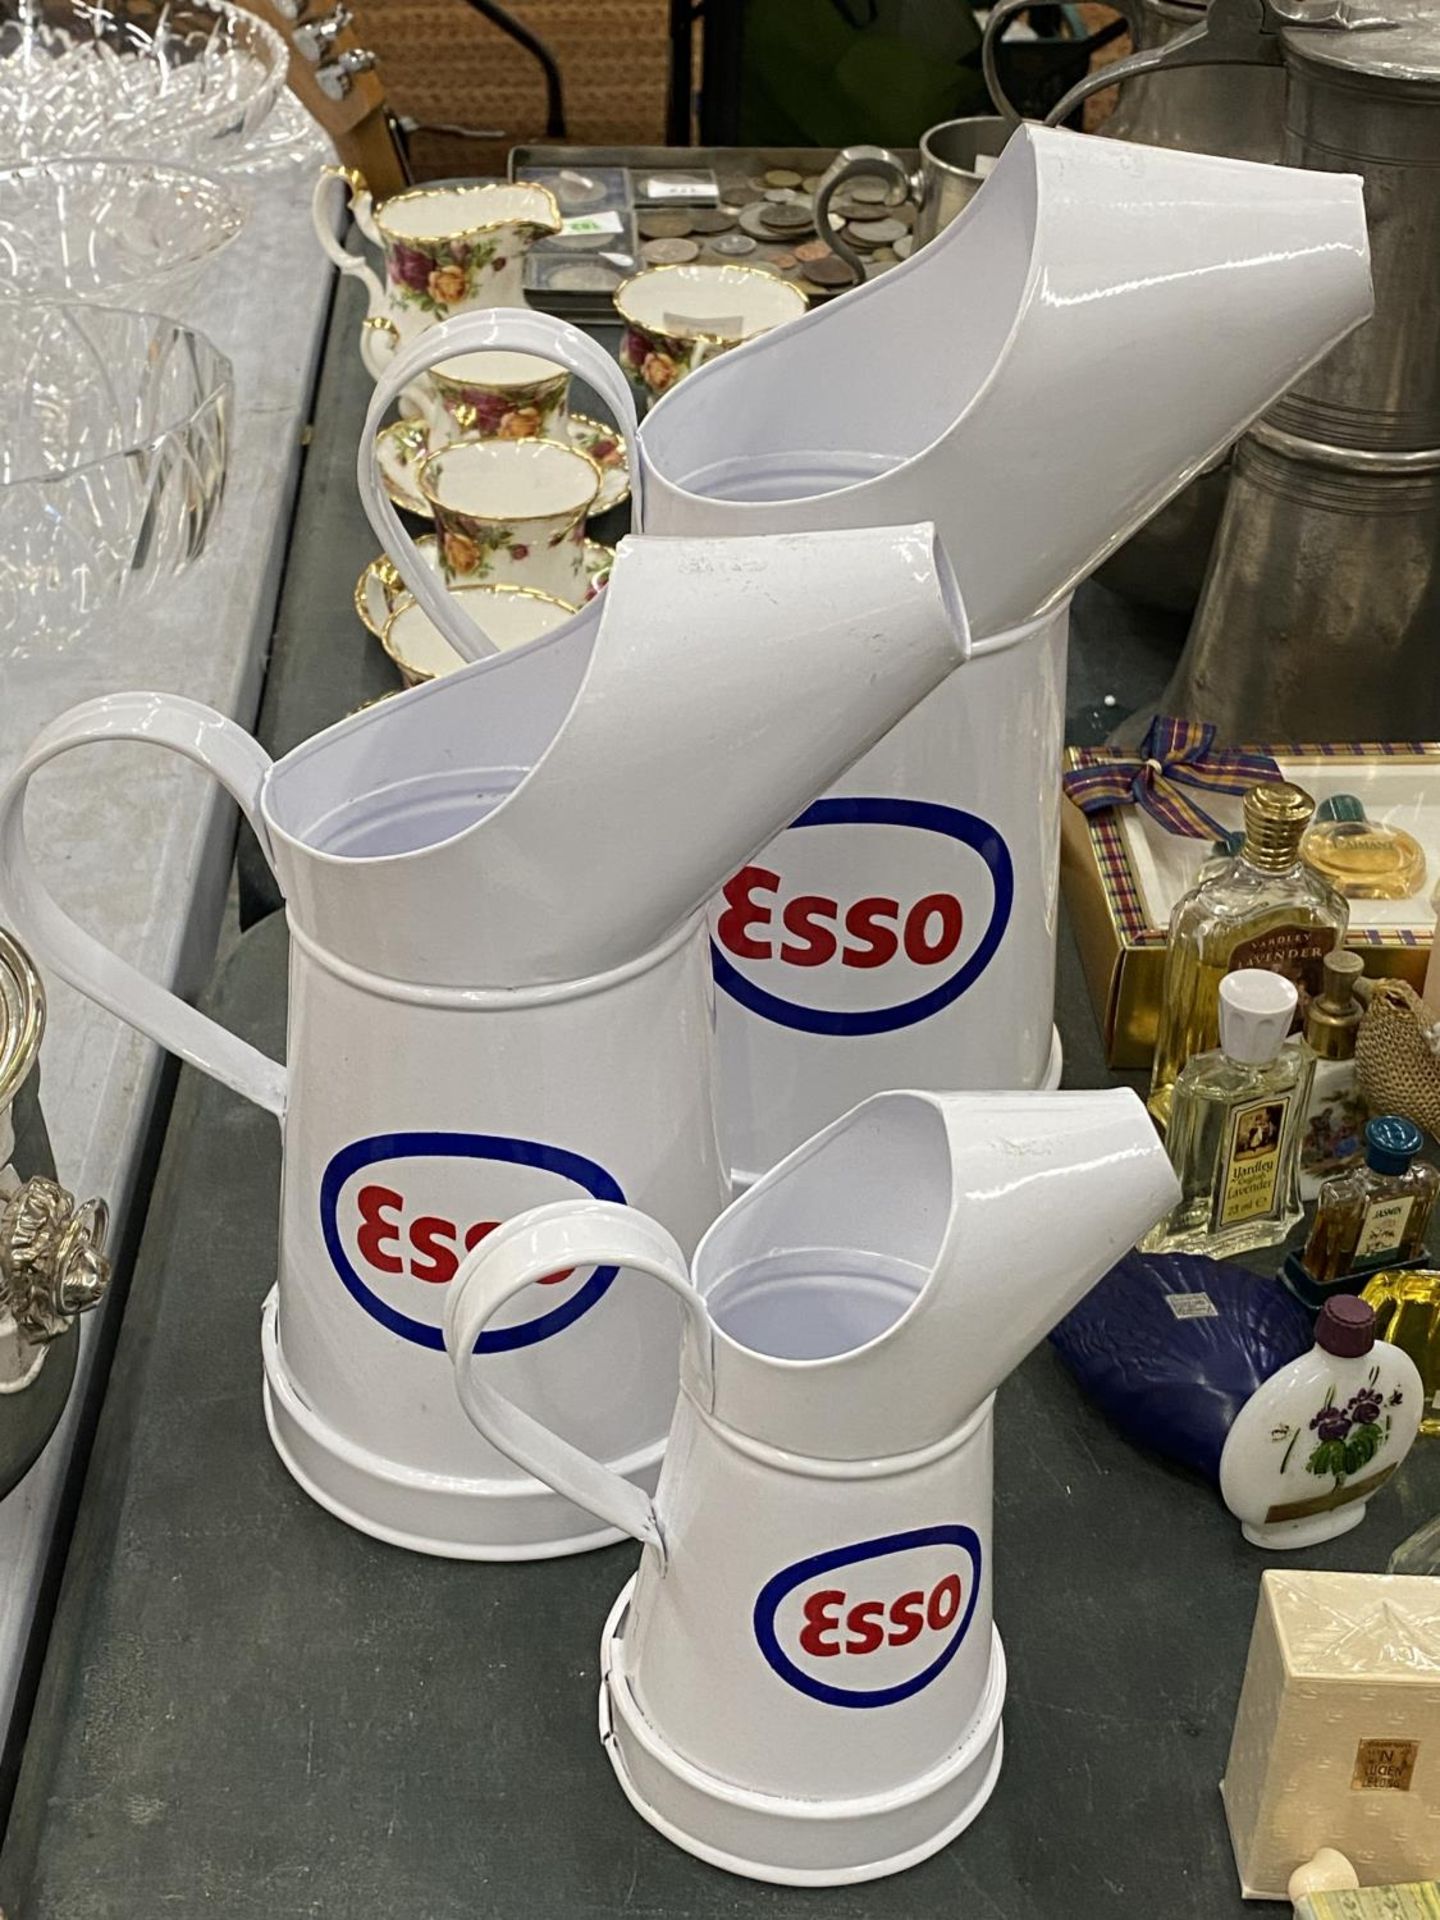 THREE GRADUATED 'ESSO' OIL CANS, HEIGHTS 29CM, 25CM AND 17CM